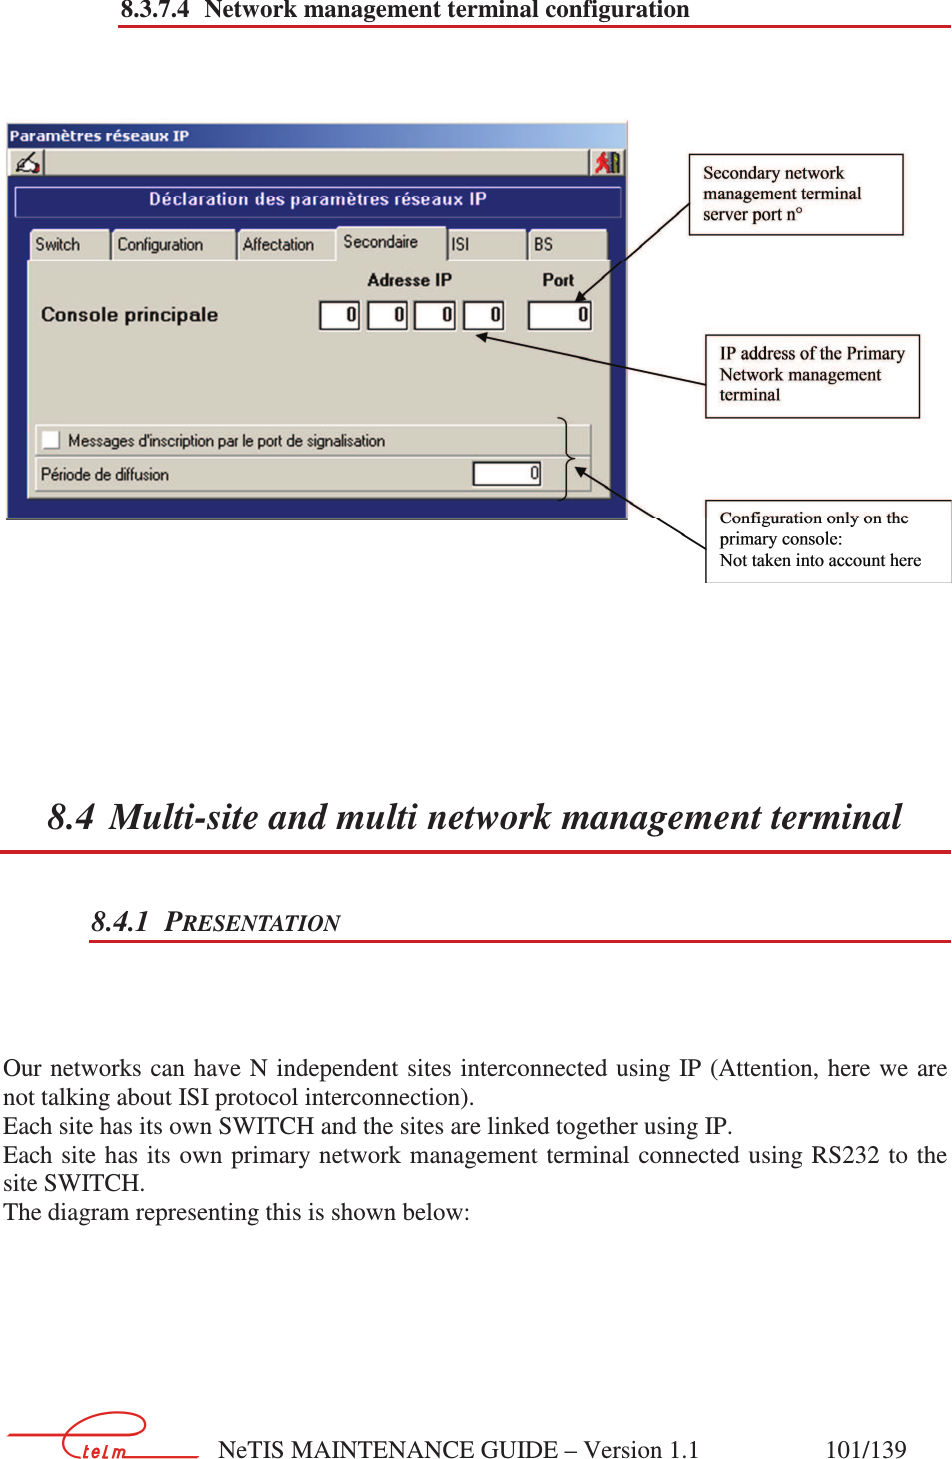        NeTIS MAINTENANCE GUIDE – Version 1.1                    101/139   8.3.7.4 Network management terminal configuration      8.4 Multi-site and multi network management terminal 8.4.1 PRESENTATION    Our networks can have N independent sites interconnected using  IP (Attention, here we are not talking about ISI protocol interconnection). Each site has its own SWITCH and the sites are linked together using IP. Each site has its  own primary network management terminal connected using RS232 to  the site SWITCH. The diagram representing this is shown below:     